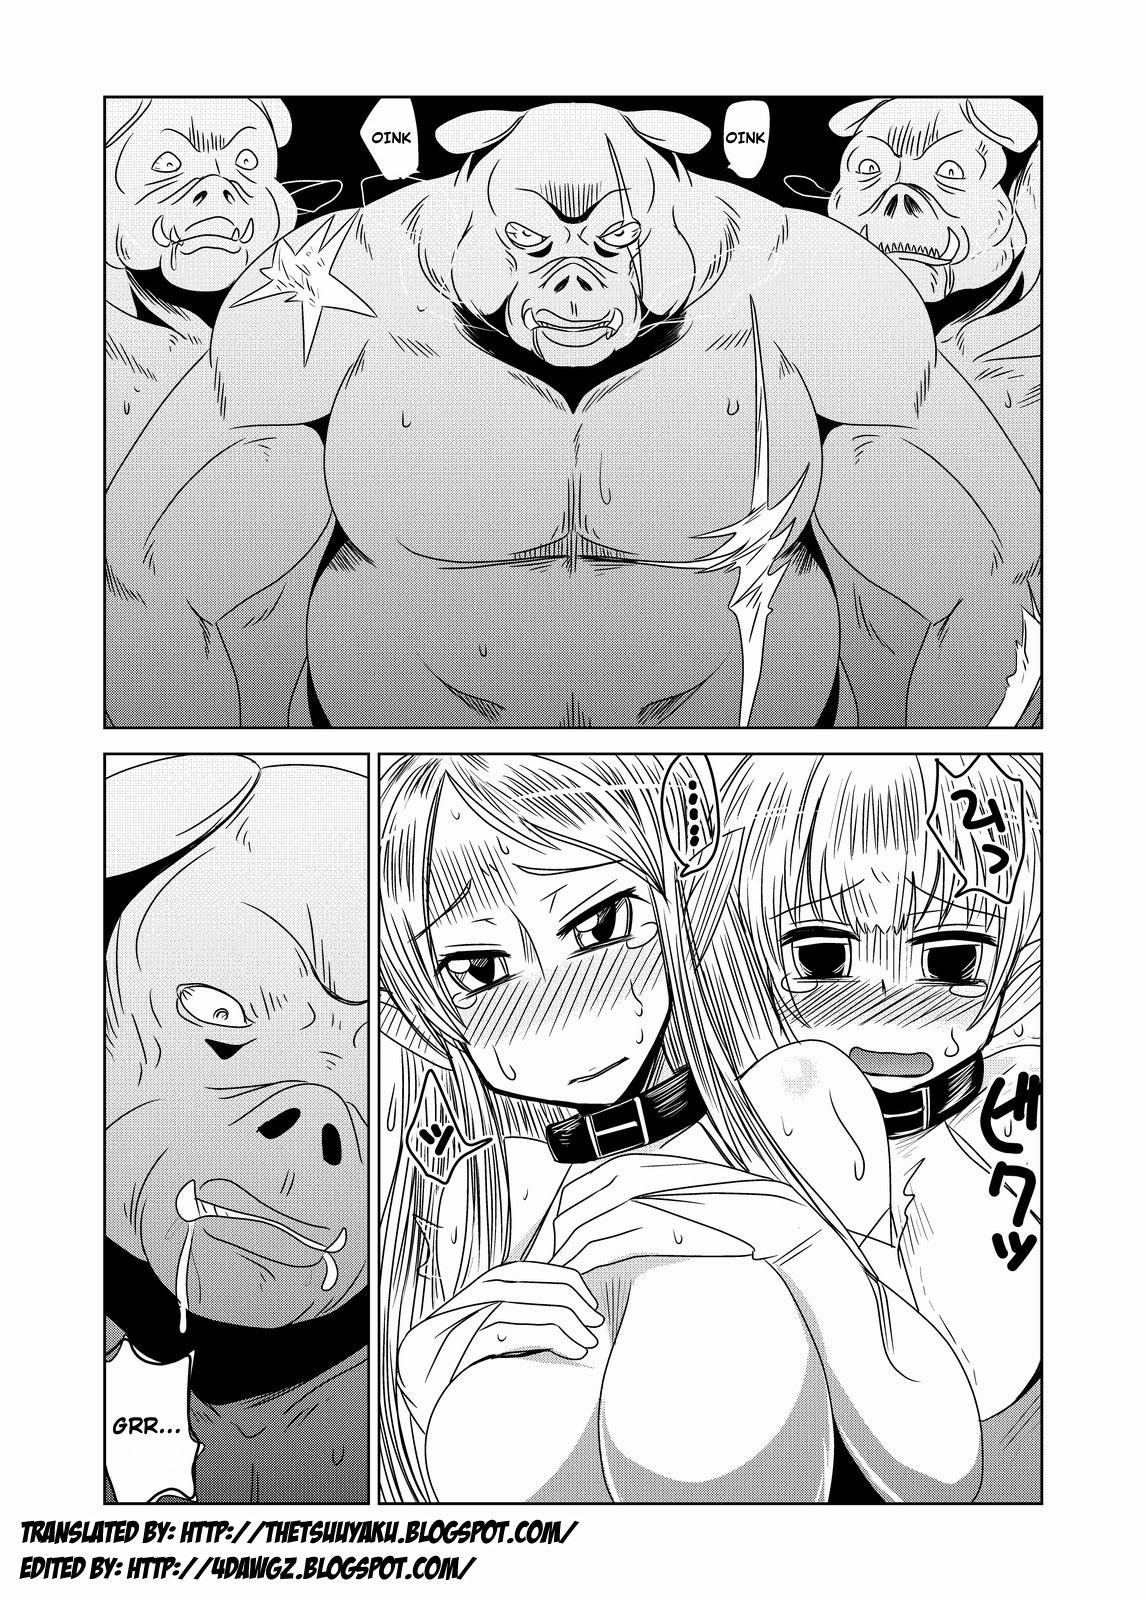 Girl Fucked Hard Orc Dakara Elf Osotta Zenin Succubus Datta wa. | We Assaulted Some Elves Because We're Orcs But It Turns Out They Were All Actually Succubi Mexico - Page 2